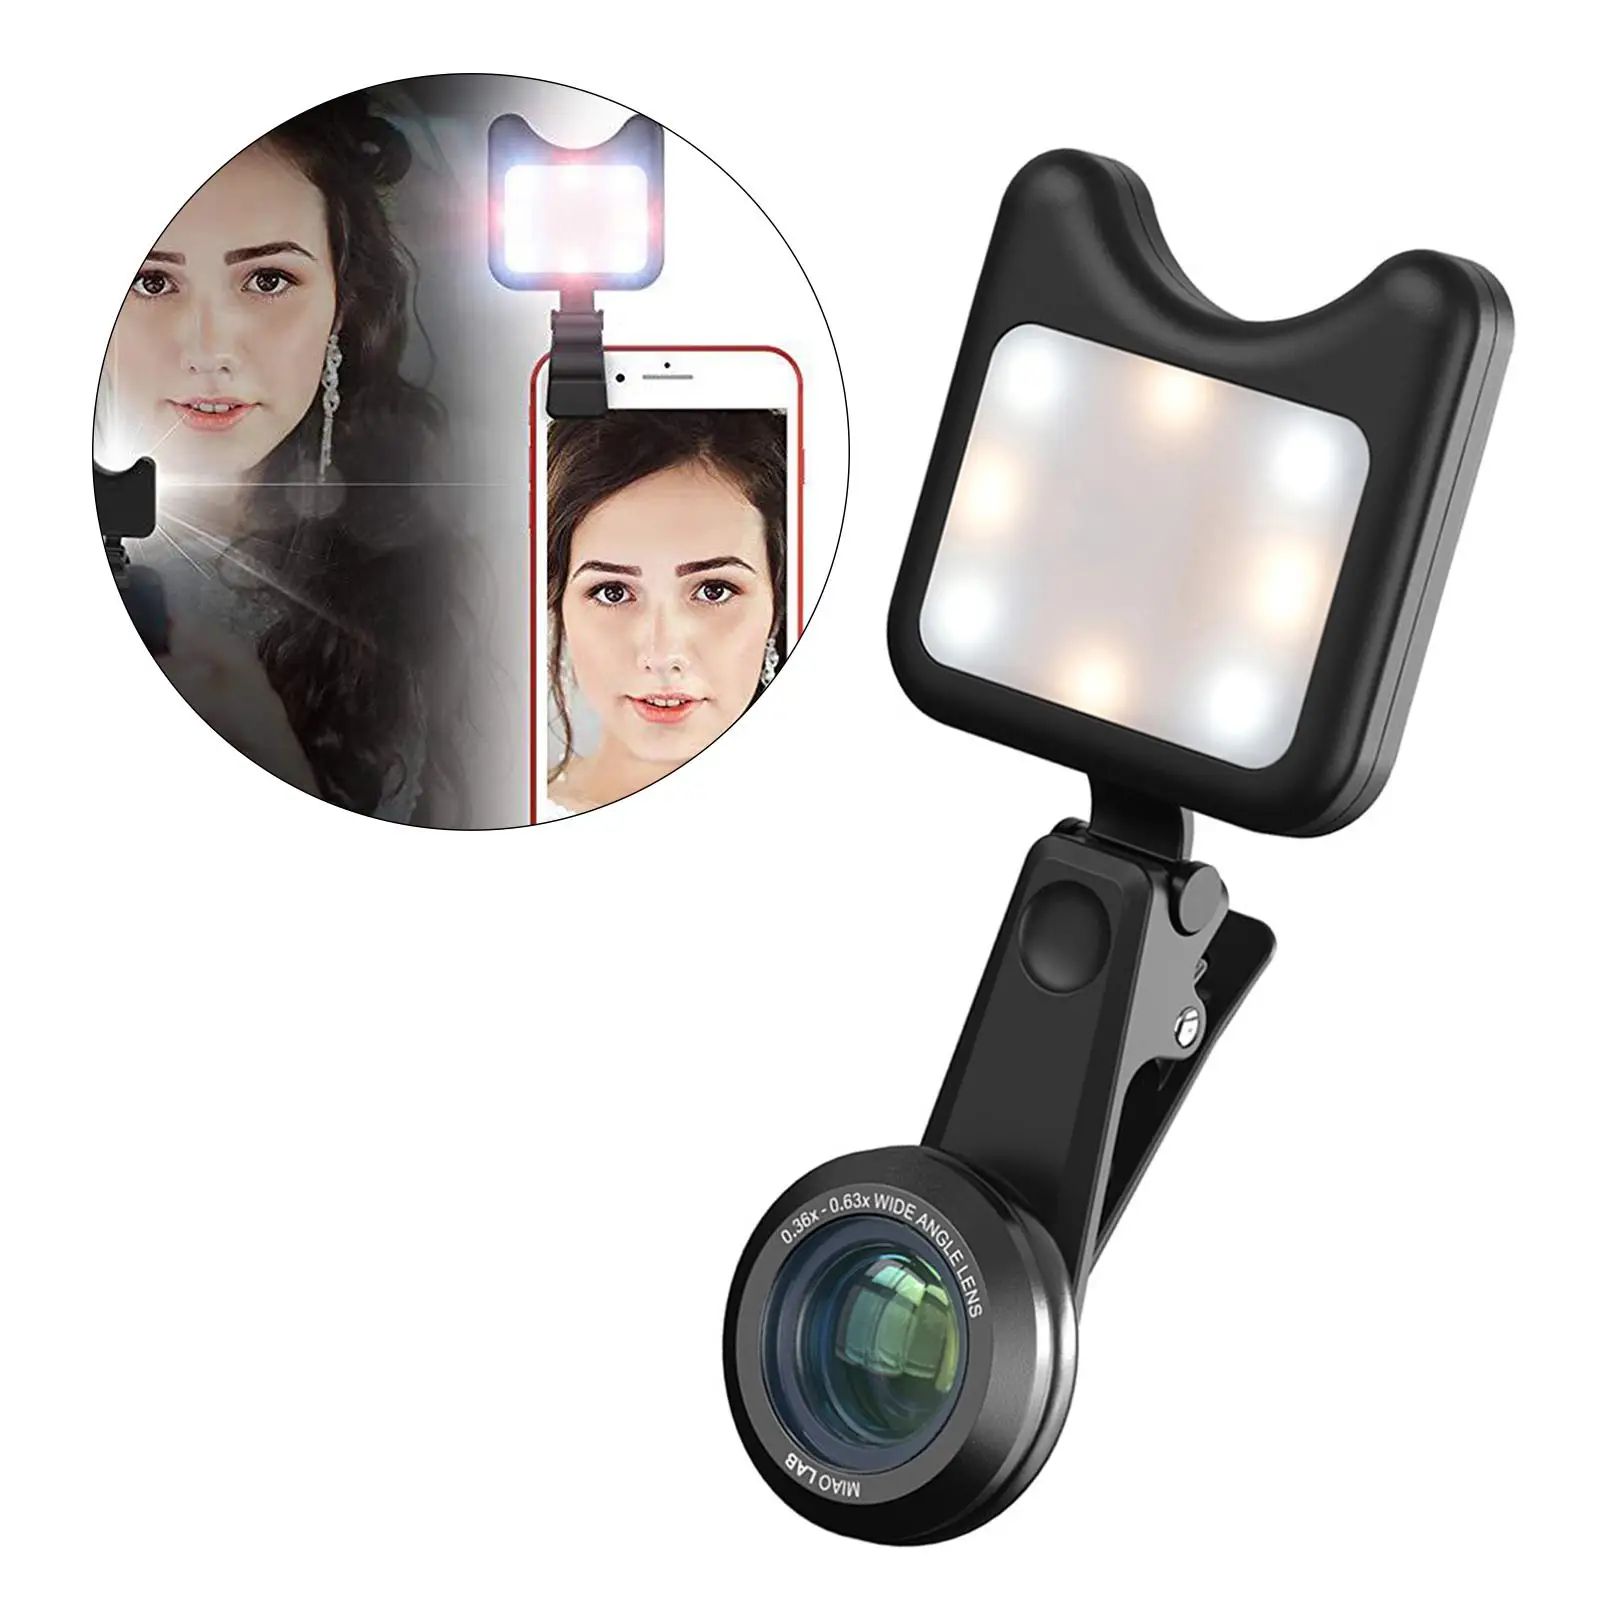  w/ 0.36 Angle Lens for Laptop Camera Video Portable for Any Cellphone Smartphone